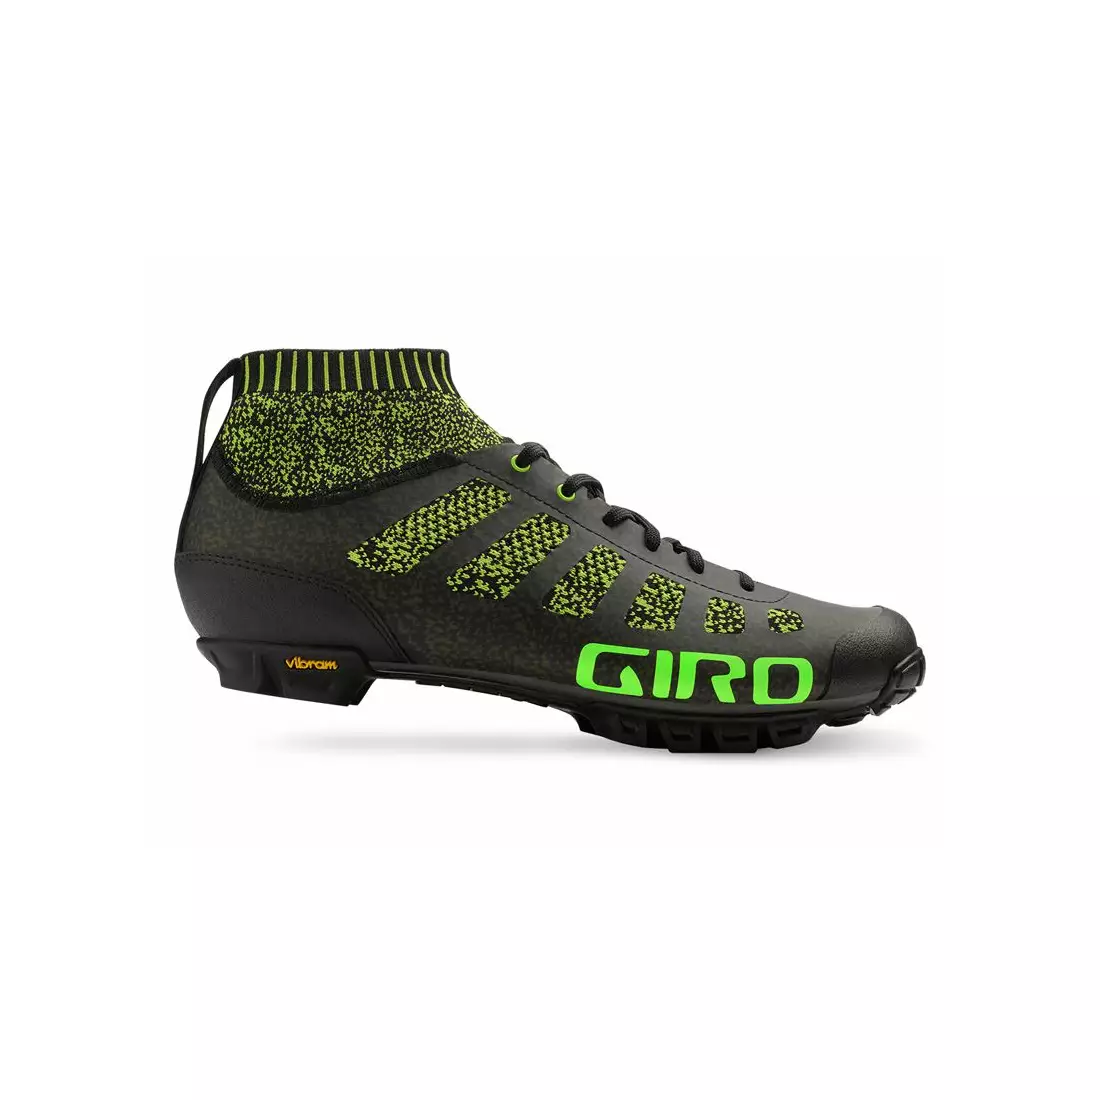 GIRO men's bicycle shoes EMPIRE VR70 Knit lime black GR-7089786